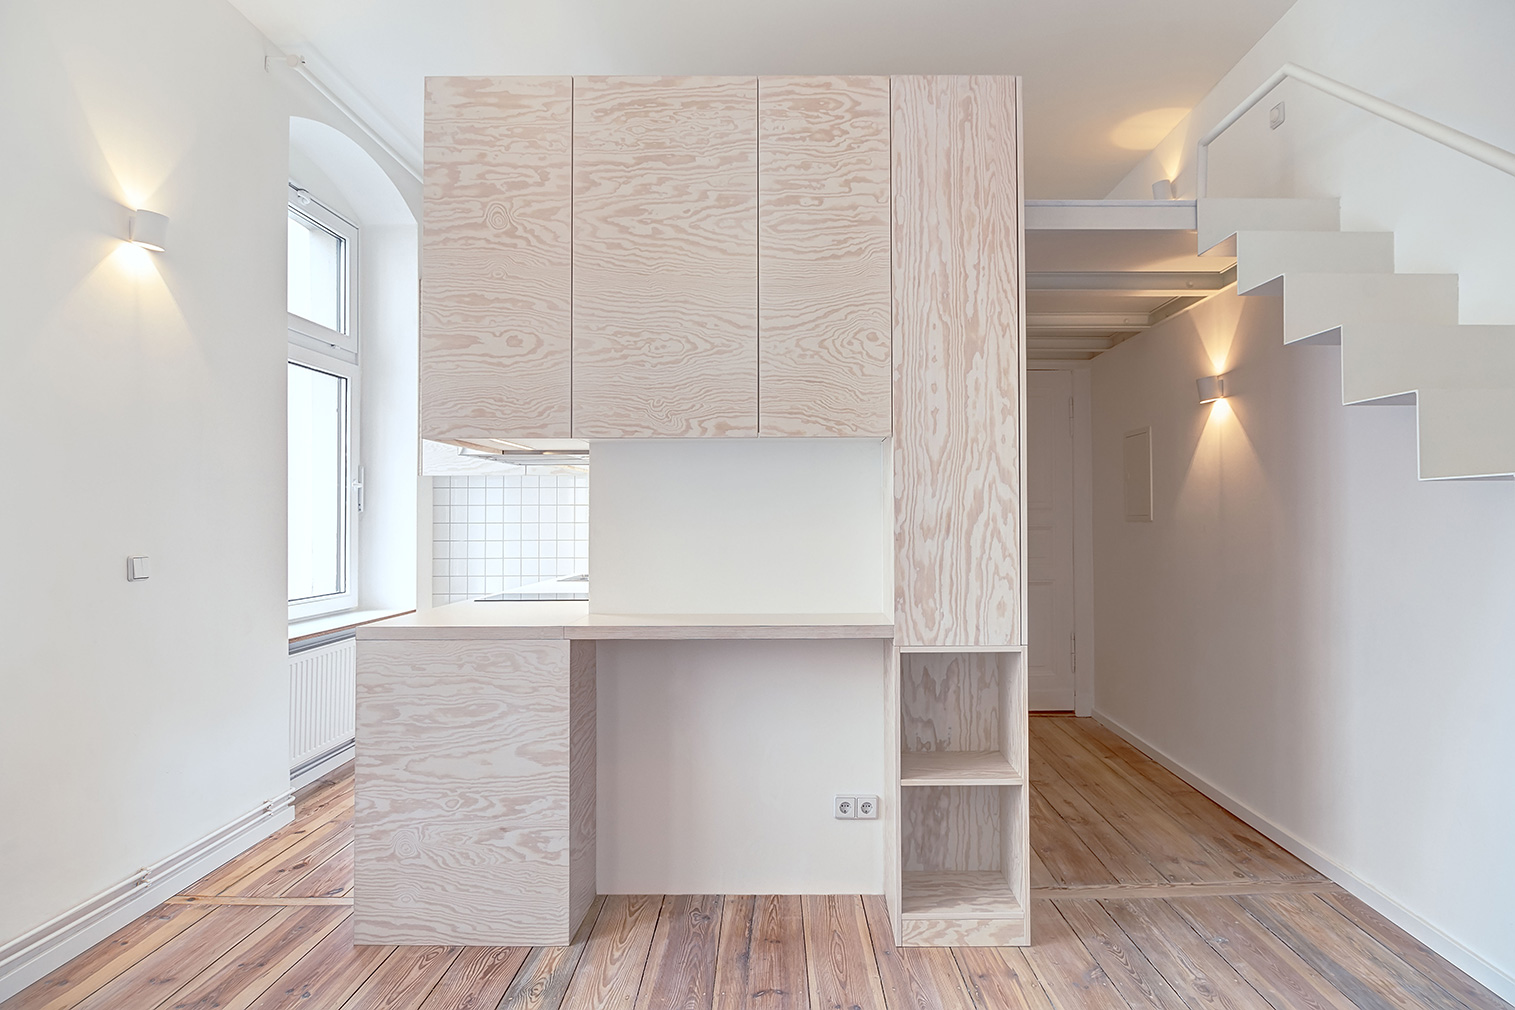 Micro home apartment designed by Paola Bagna